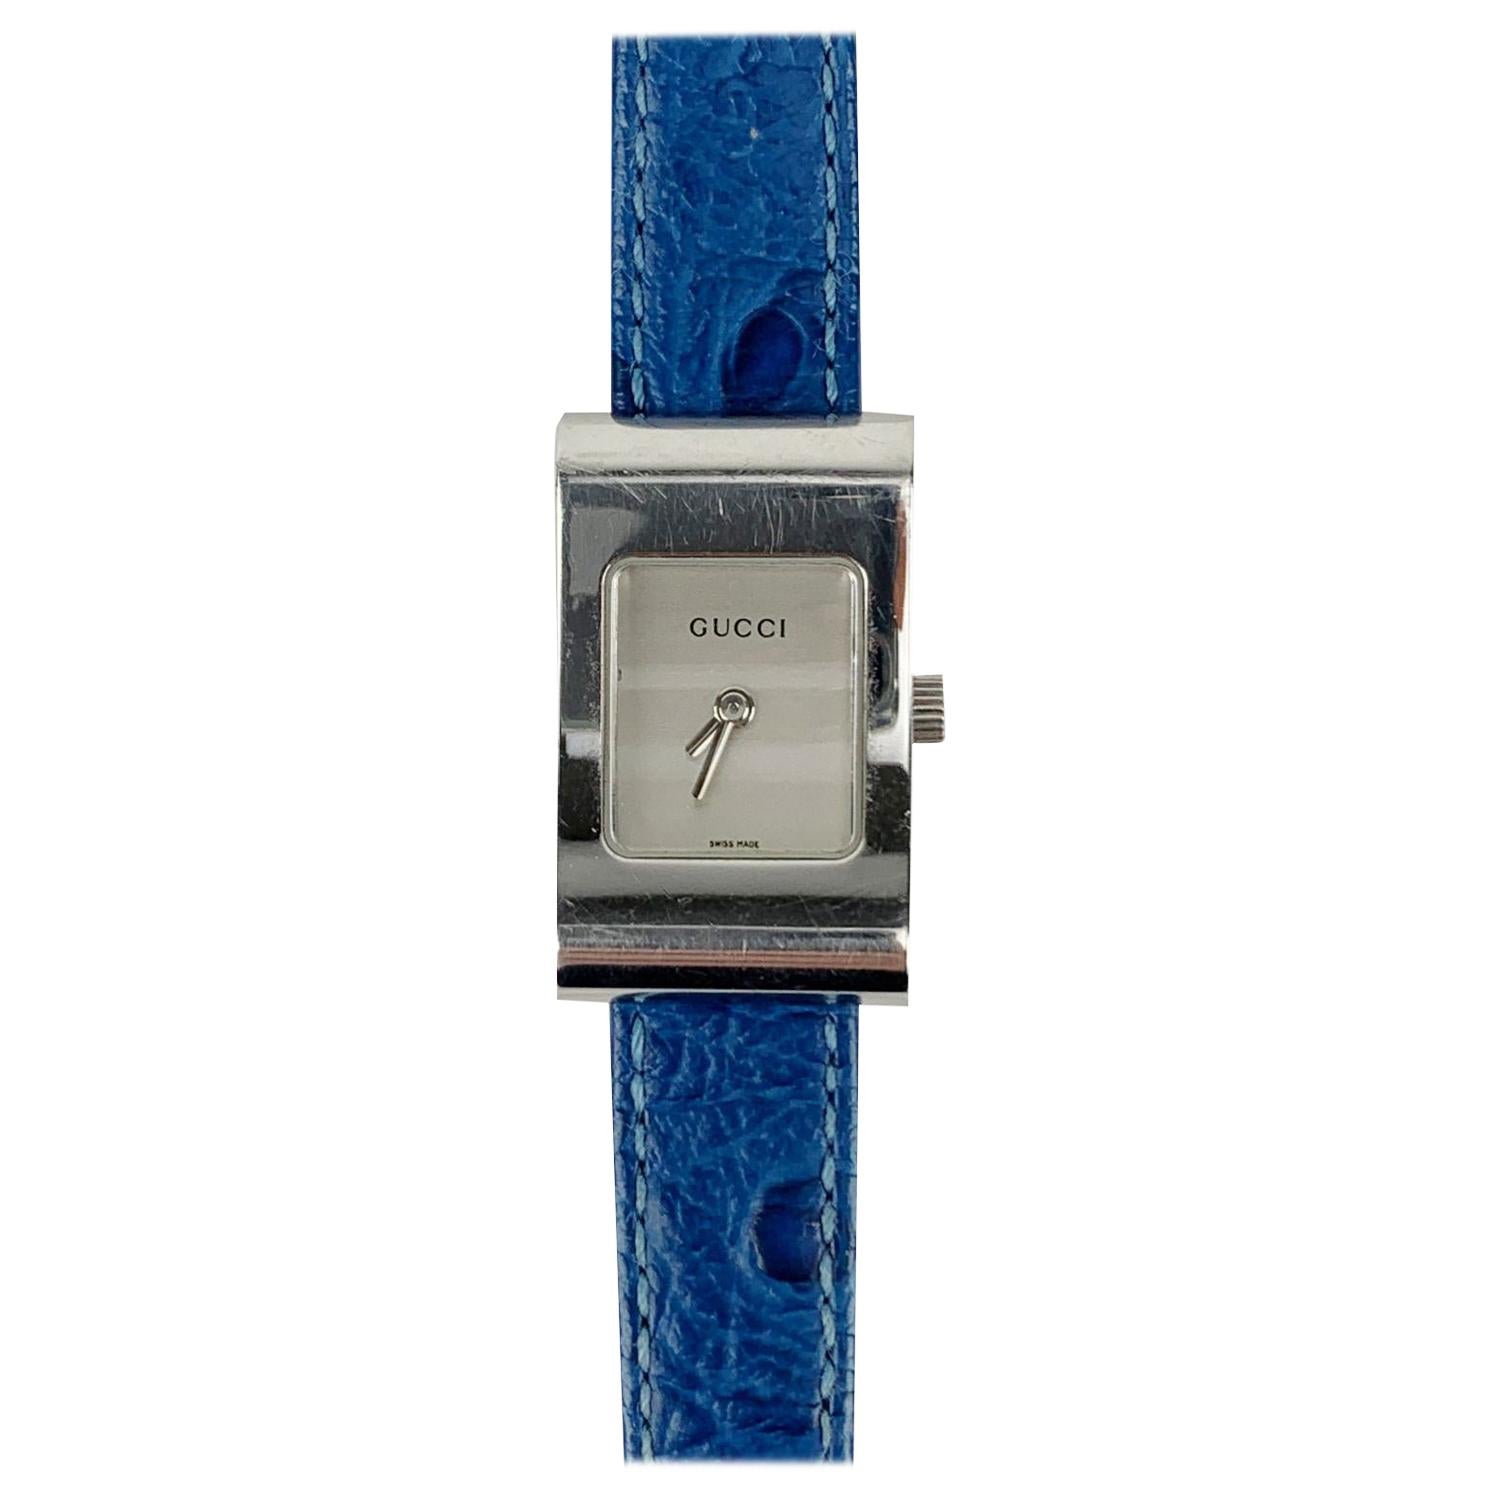 Gucci Vintage Stainless Steel Wrist Watch 2300 L Blue Leather Strap